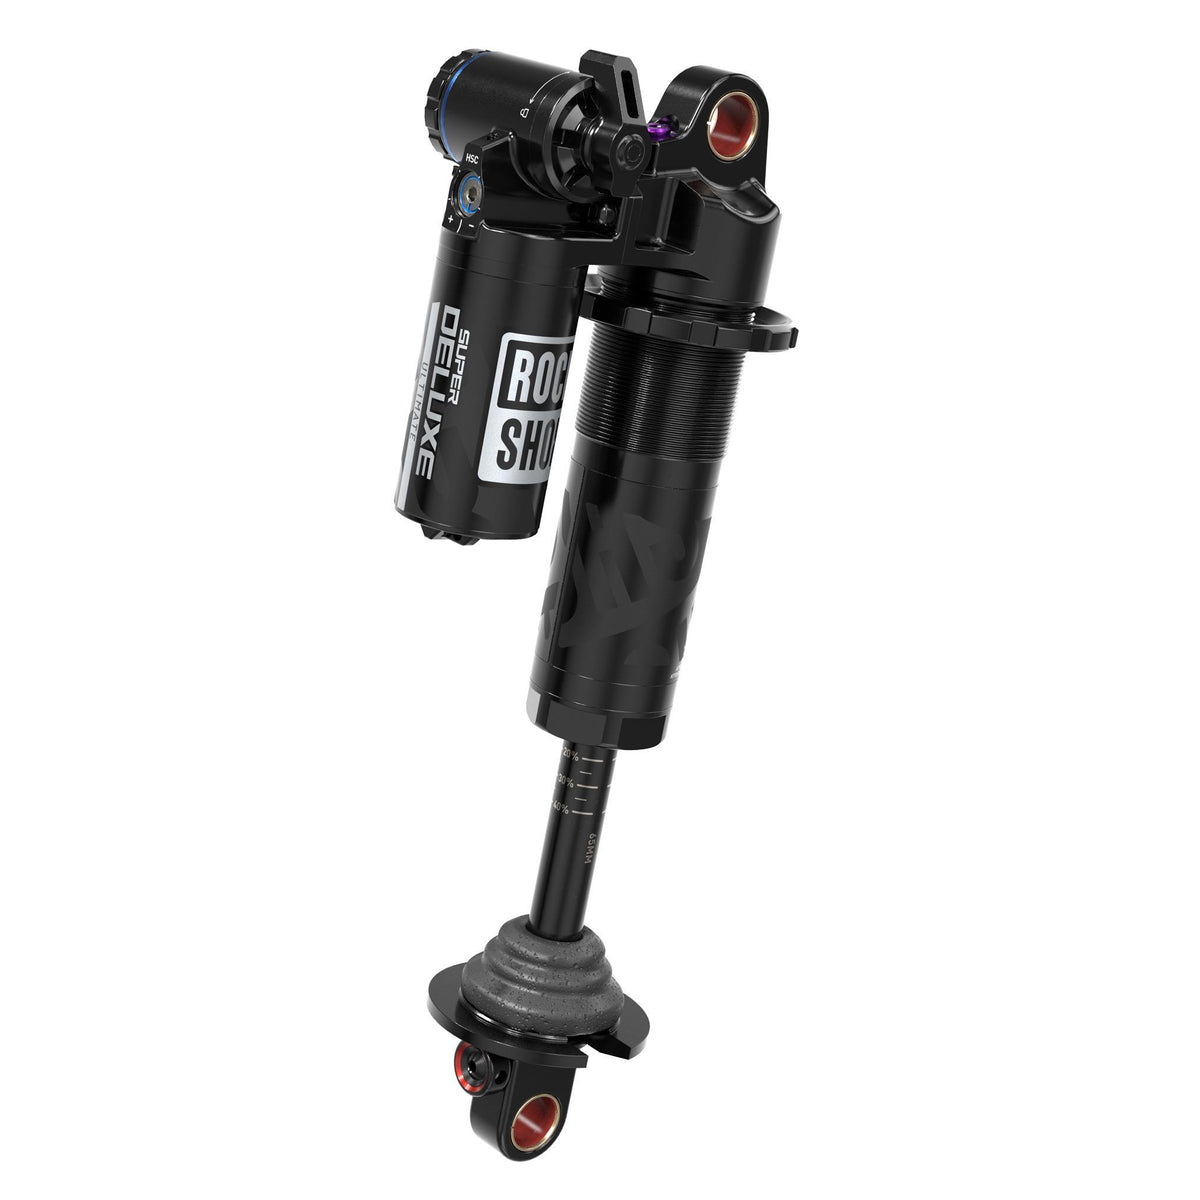 Rockshox Super Deluxe Coil Ultimate Rear Shock RC2T - Linearreb/Lcomp, 320LB Lockout, Hydraulic Bottom Out, Bearing Standard(Spring Sold Separate) B1 Santa Cruz Nomad 5 2021+ Black 230X62.5